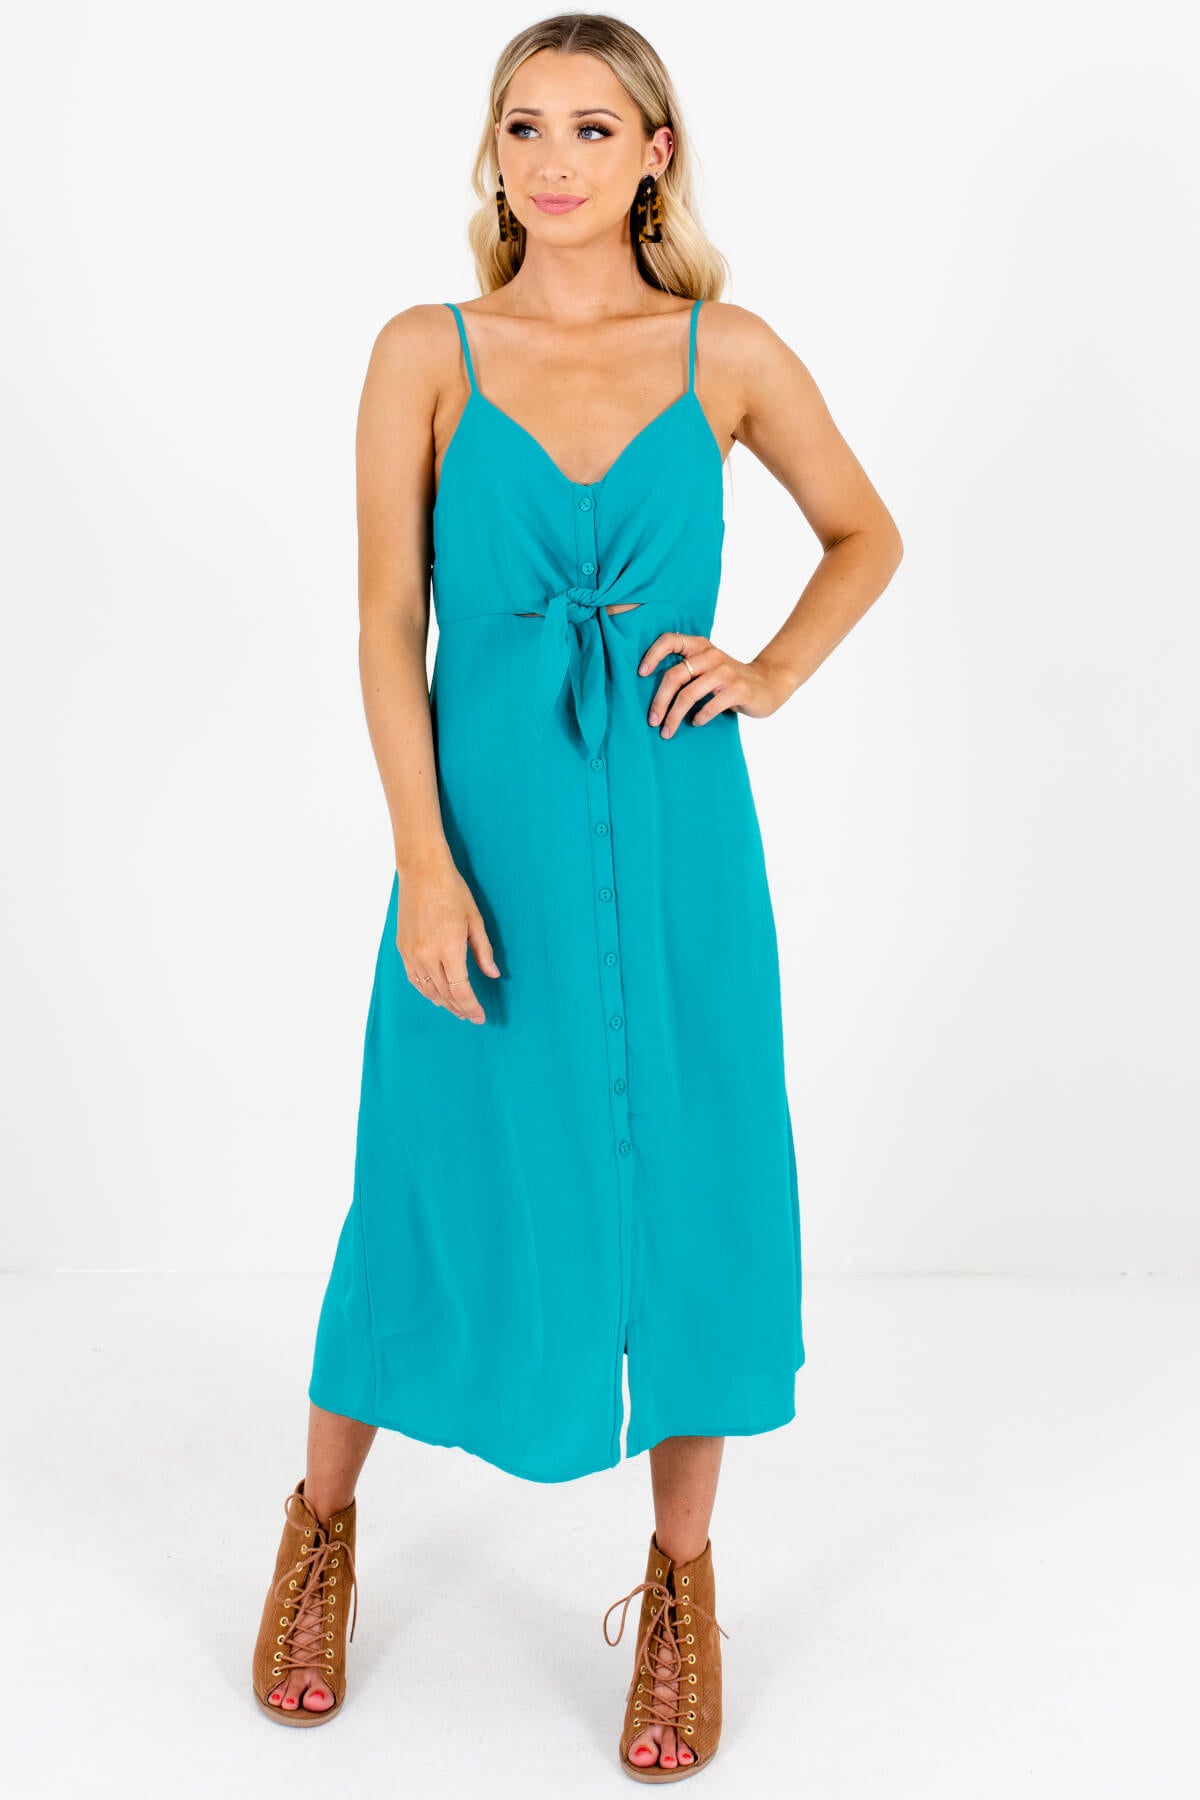 Turquoise Teal Green Button-Up Tie-Front Midi Dresses for Women